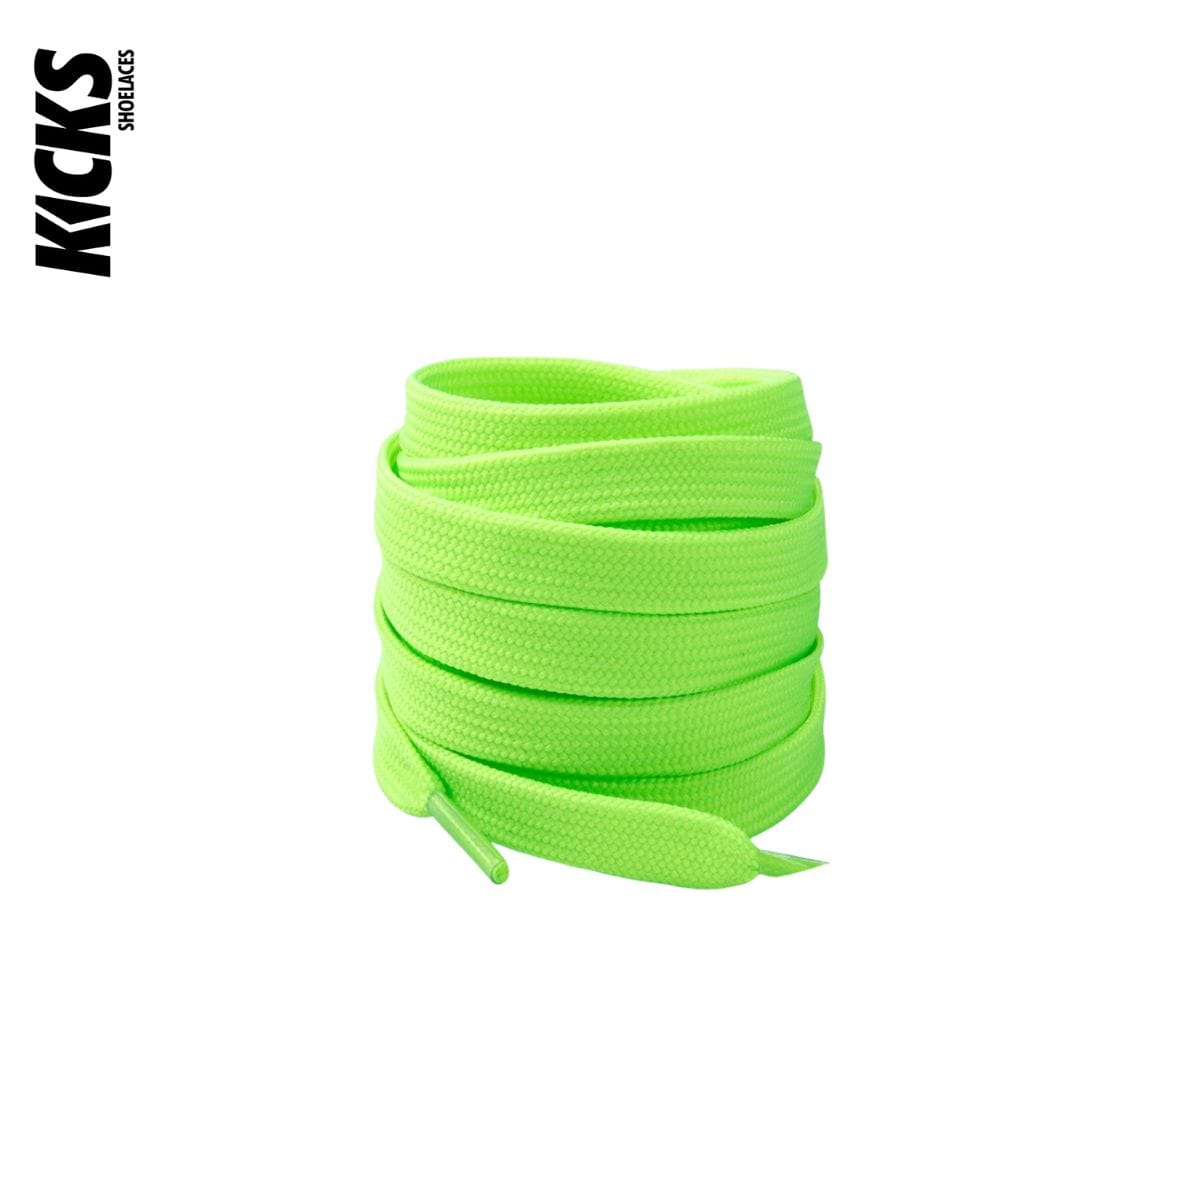 Green Replacement Laces for Adidas EQT Sneakers by Kicks Shoelaces